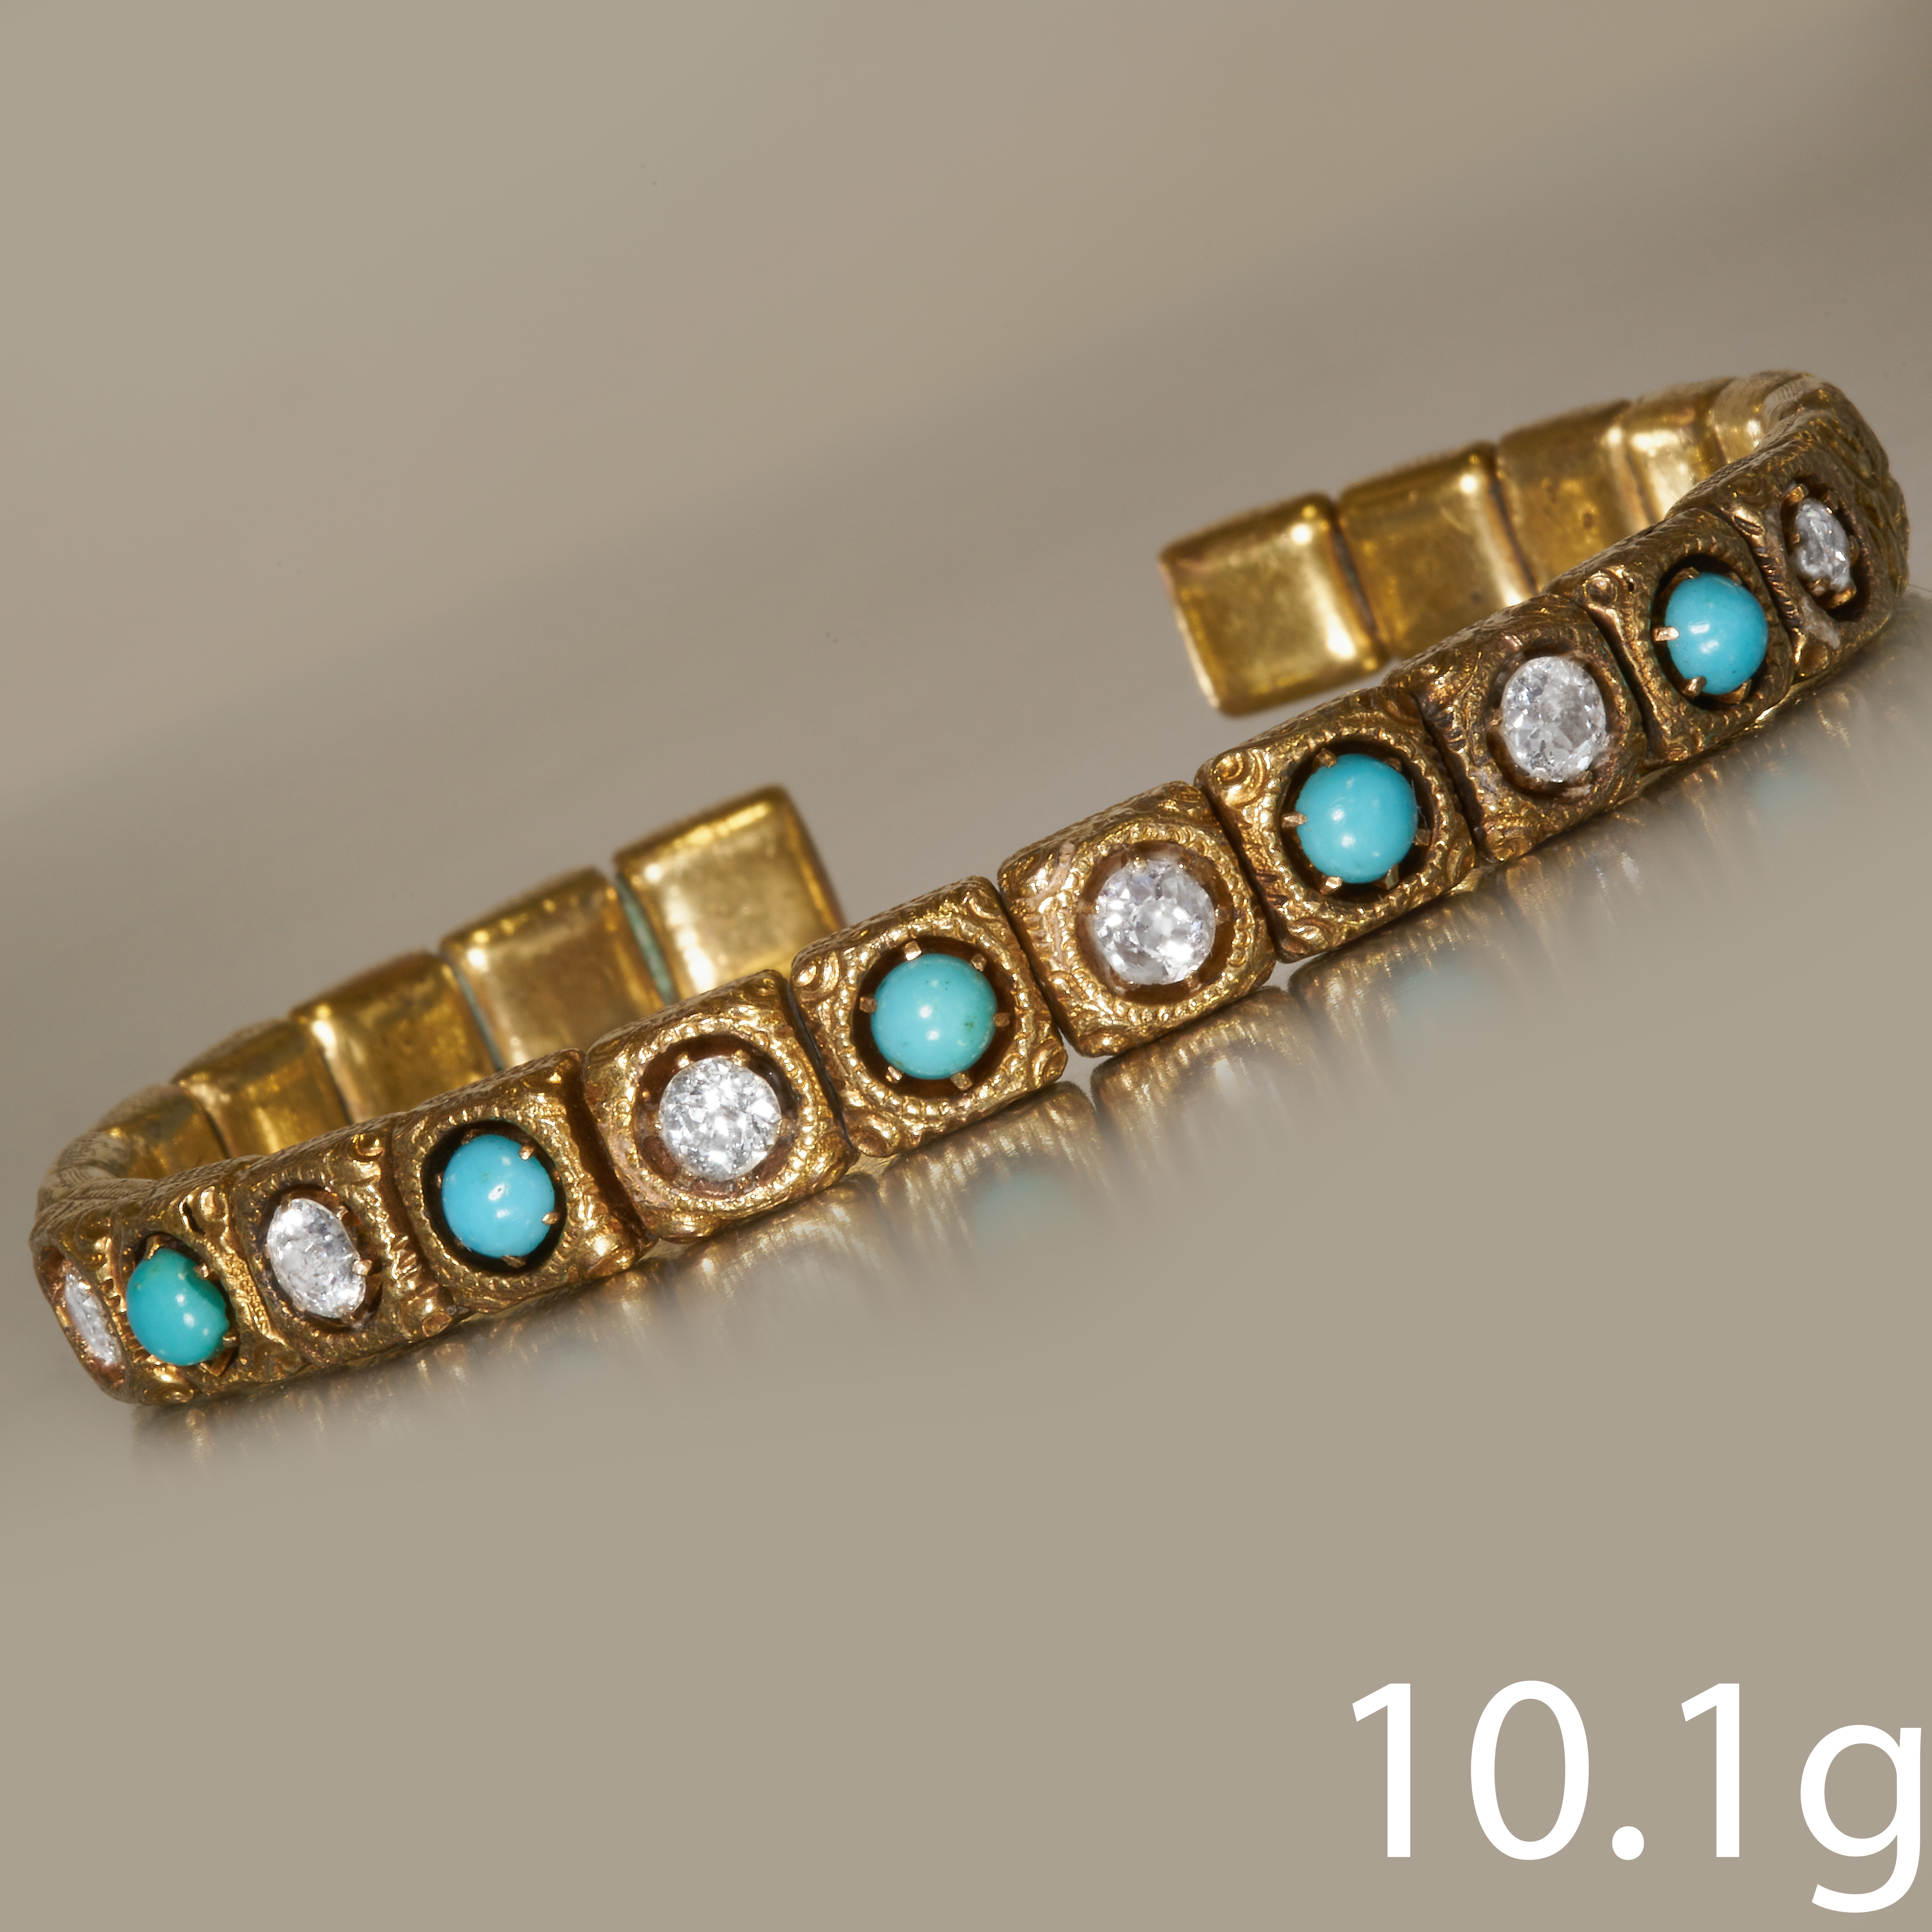 VICTORIAN GOLD TURQUOISE AND DIAMOND BANGLE